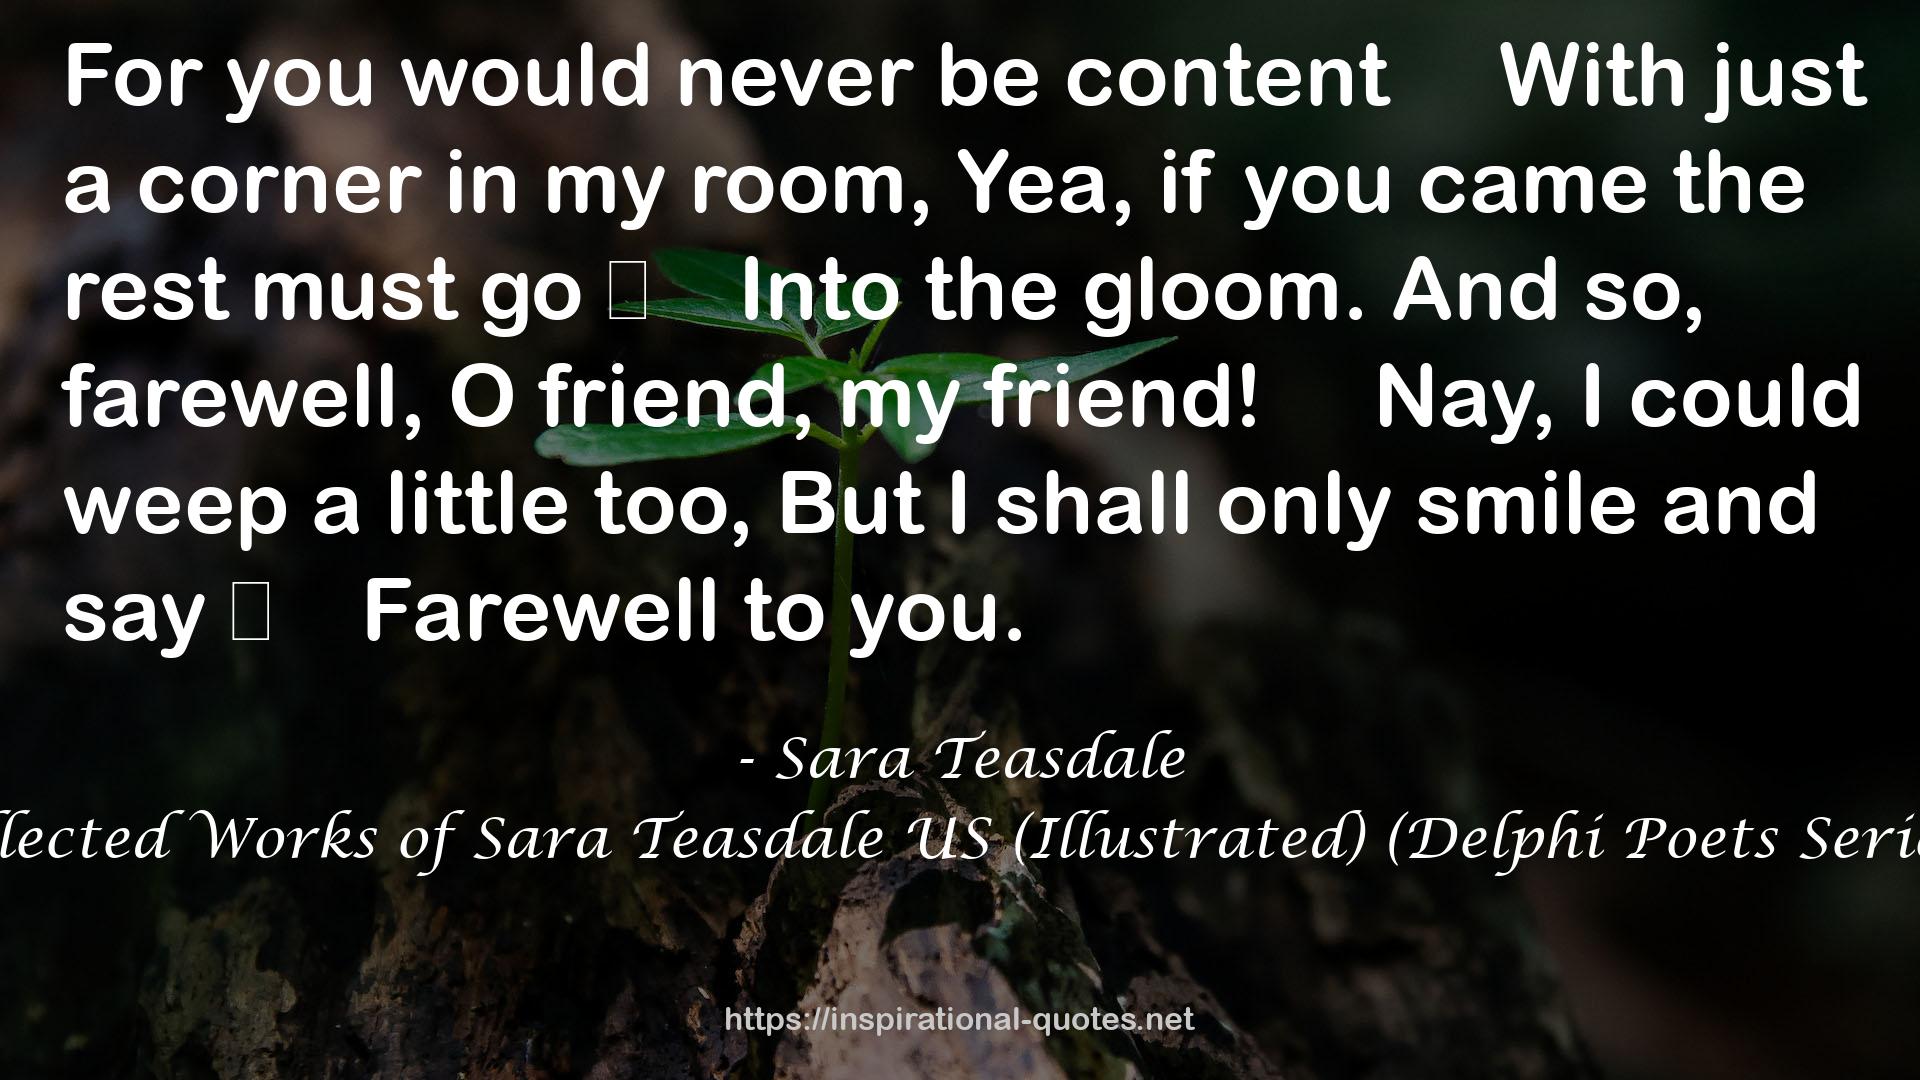 Delphi Collected Works of Sara Teasdale US (Illustrated) (Delphi Poets Series Book 77) QUOTES